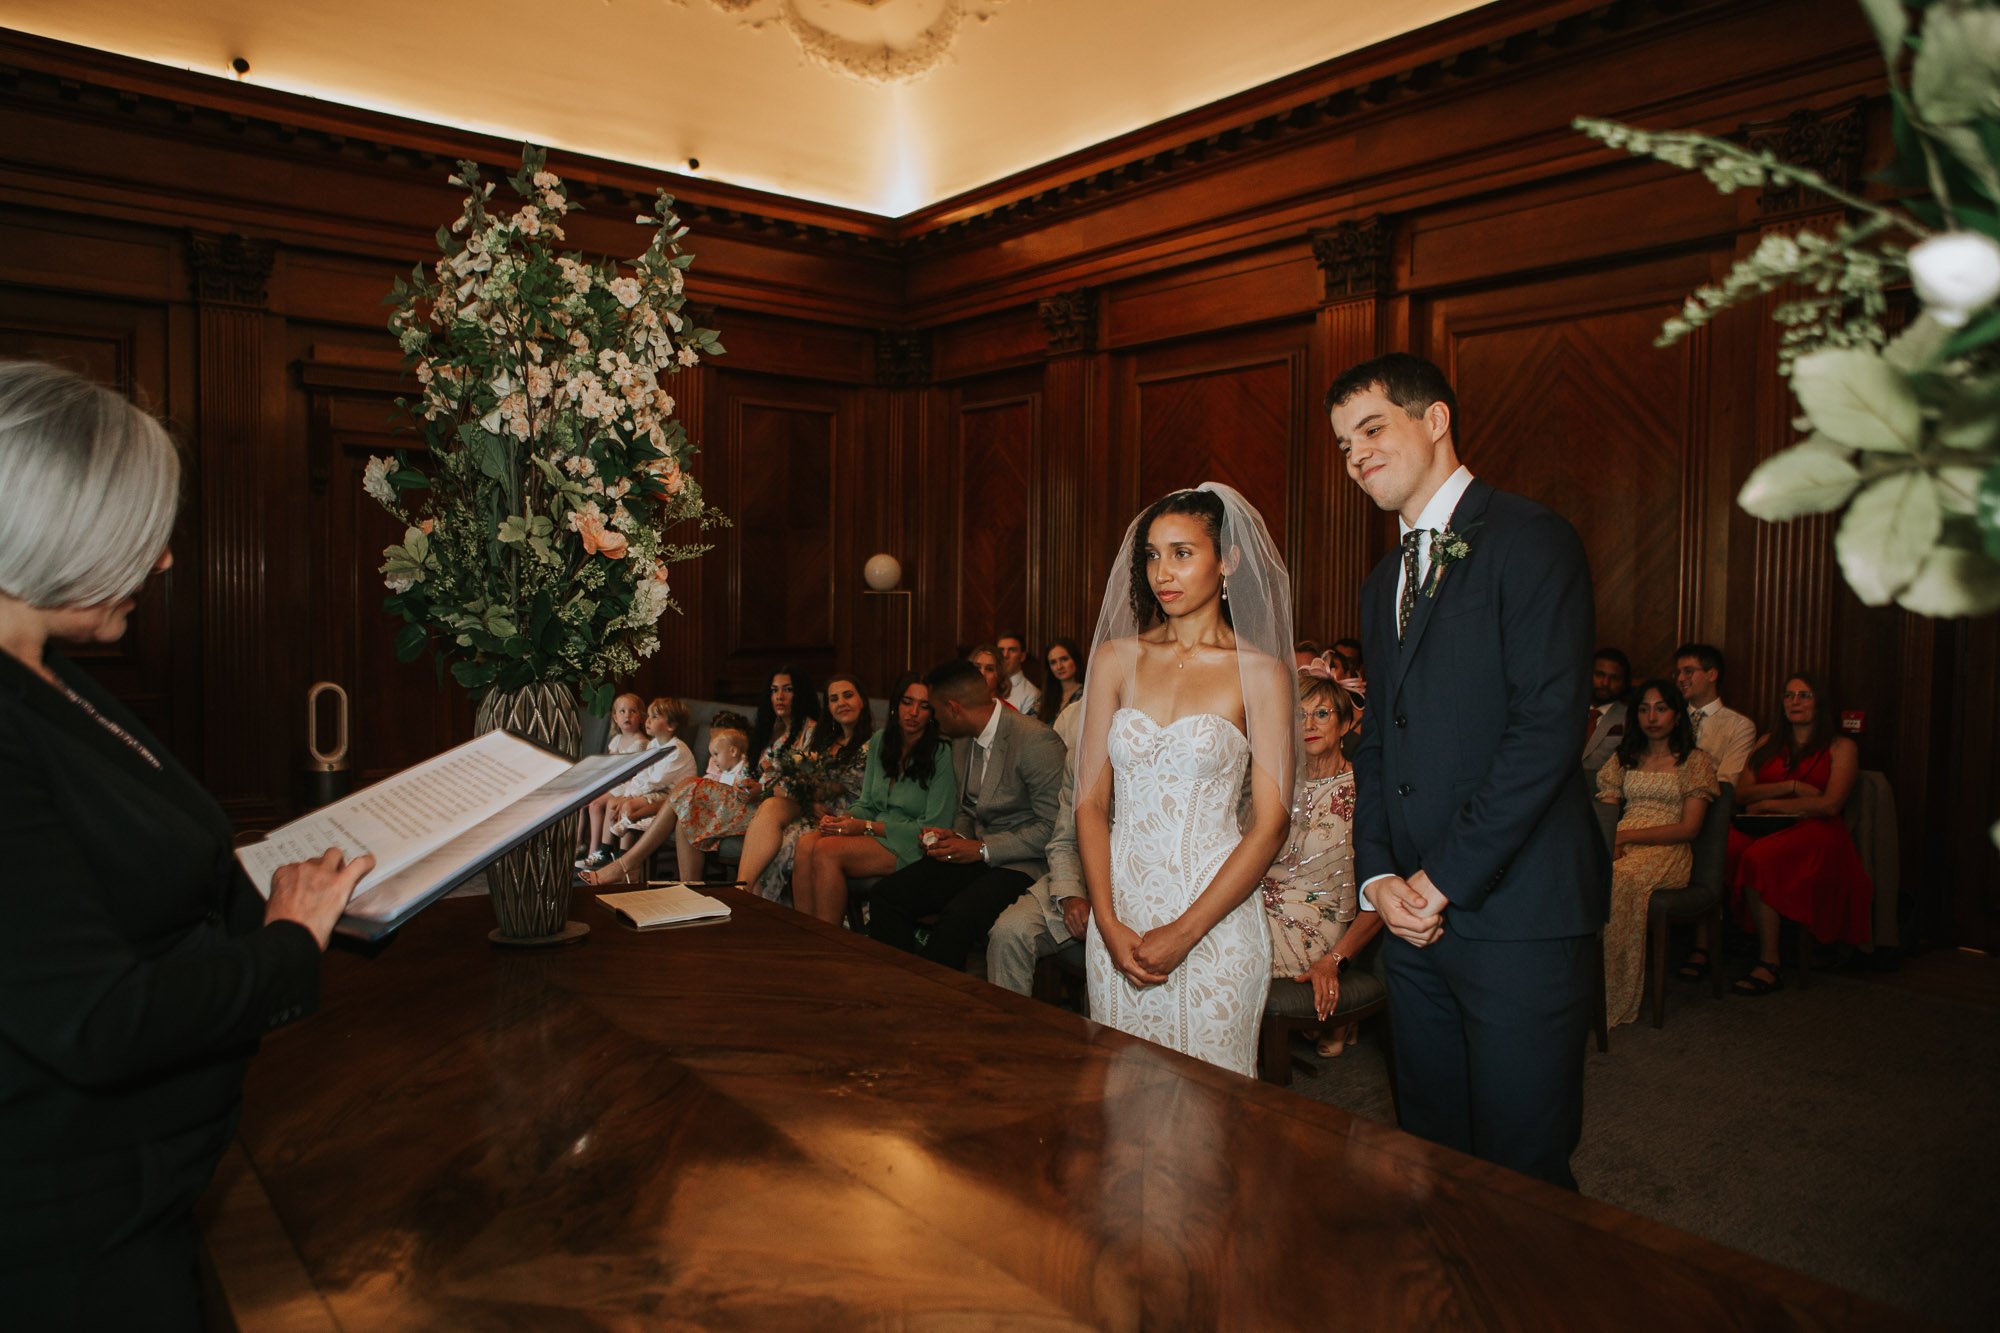  The bride and groom standing in front of the registrar in the Westminster room at Marylebone town hall in Marylebone, London. 